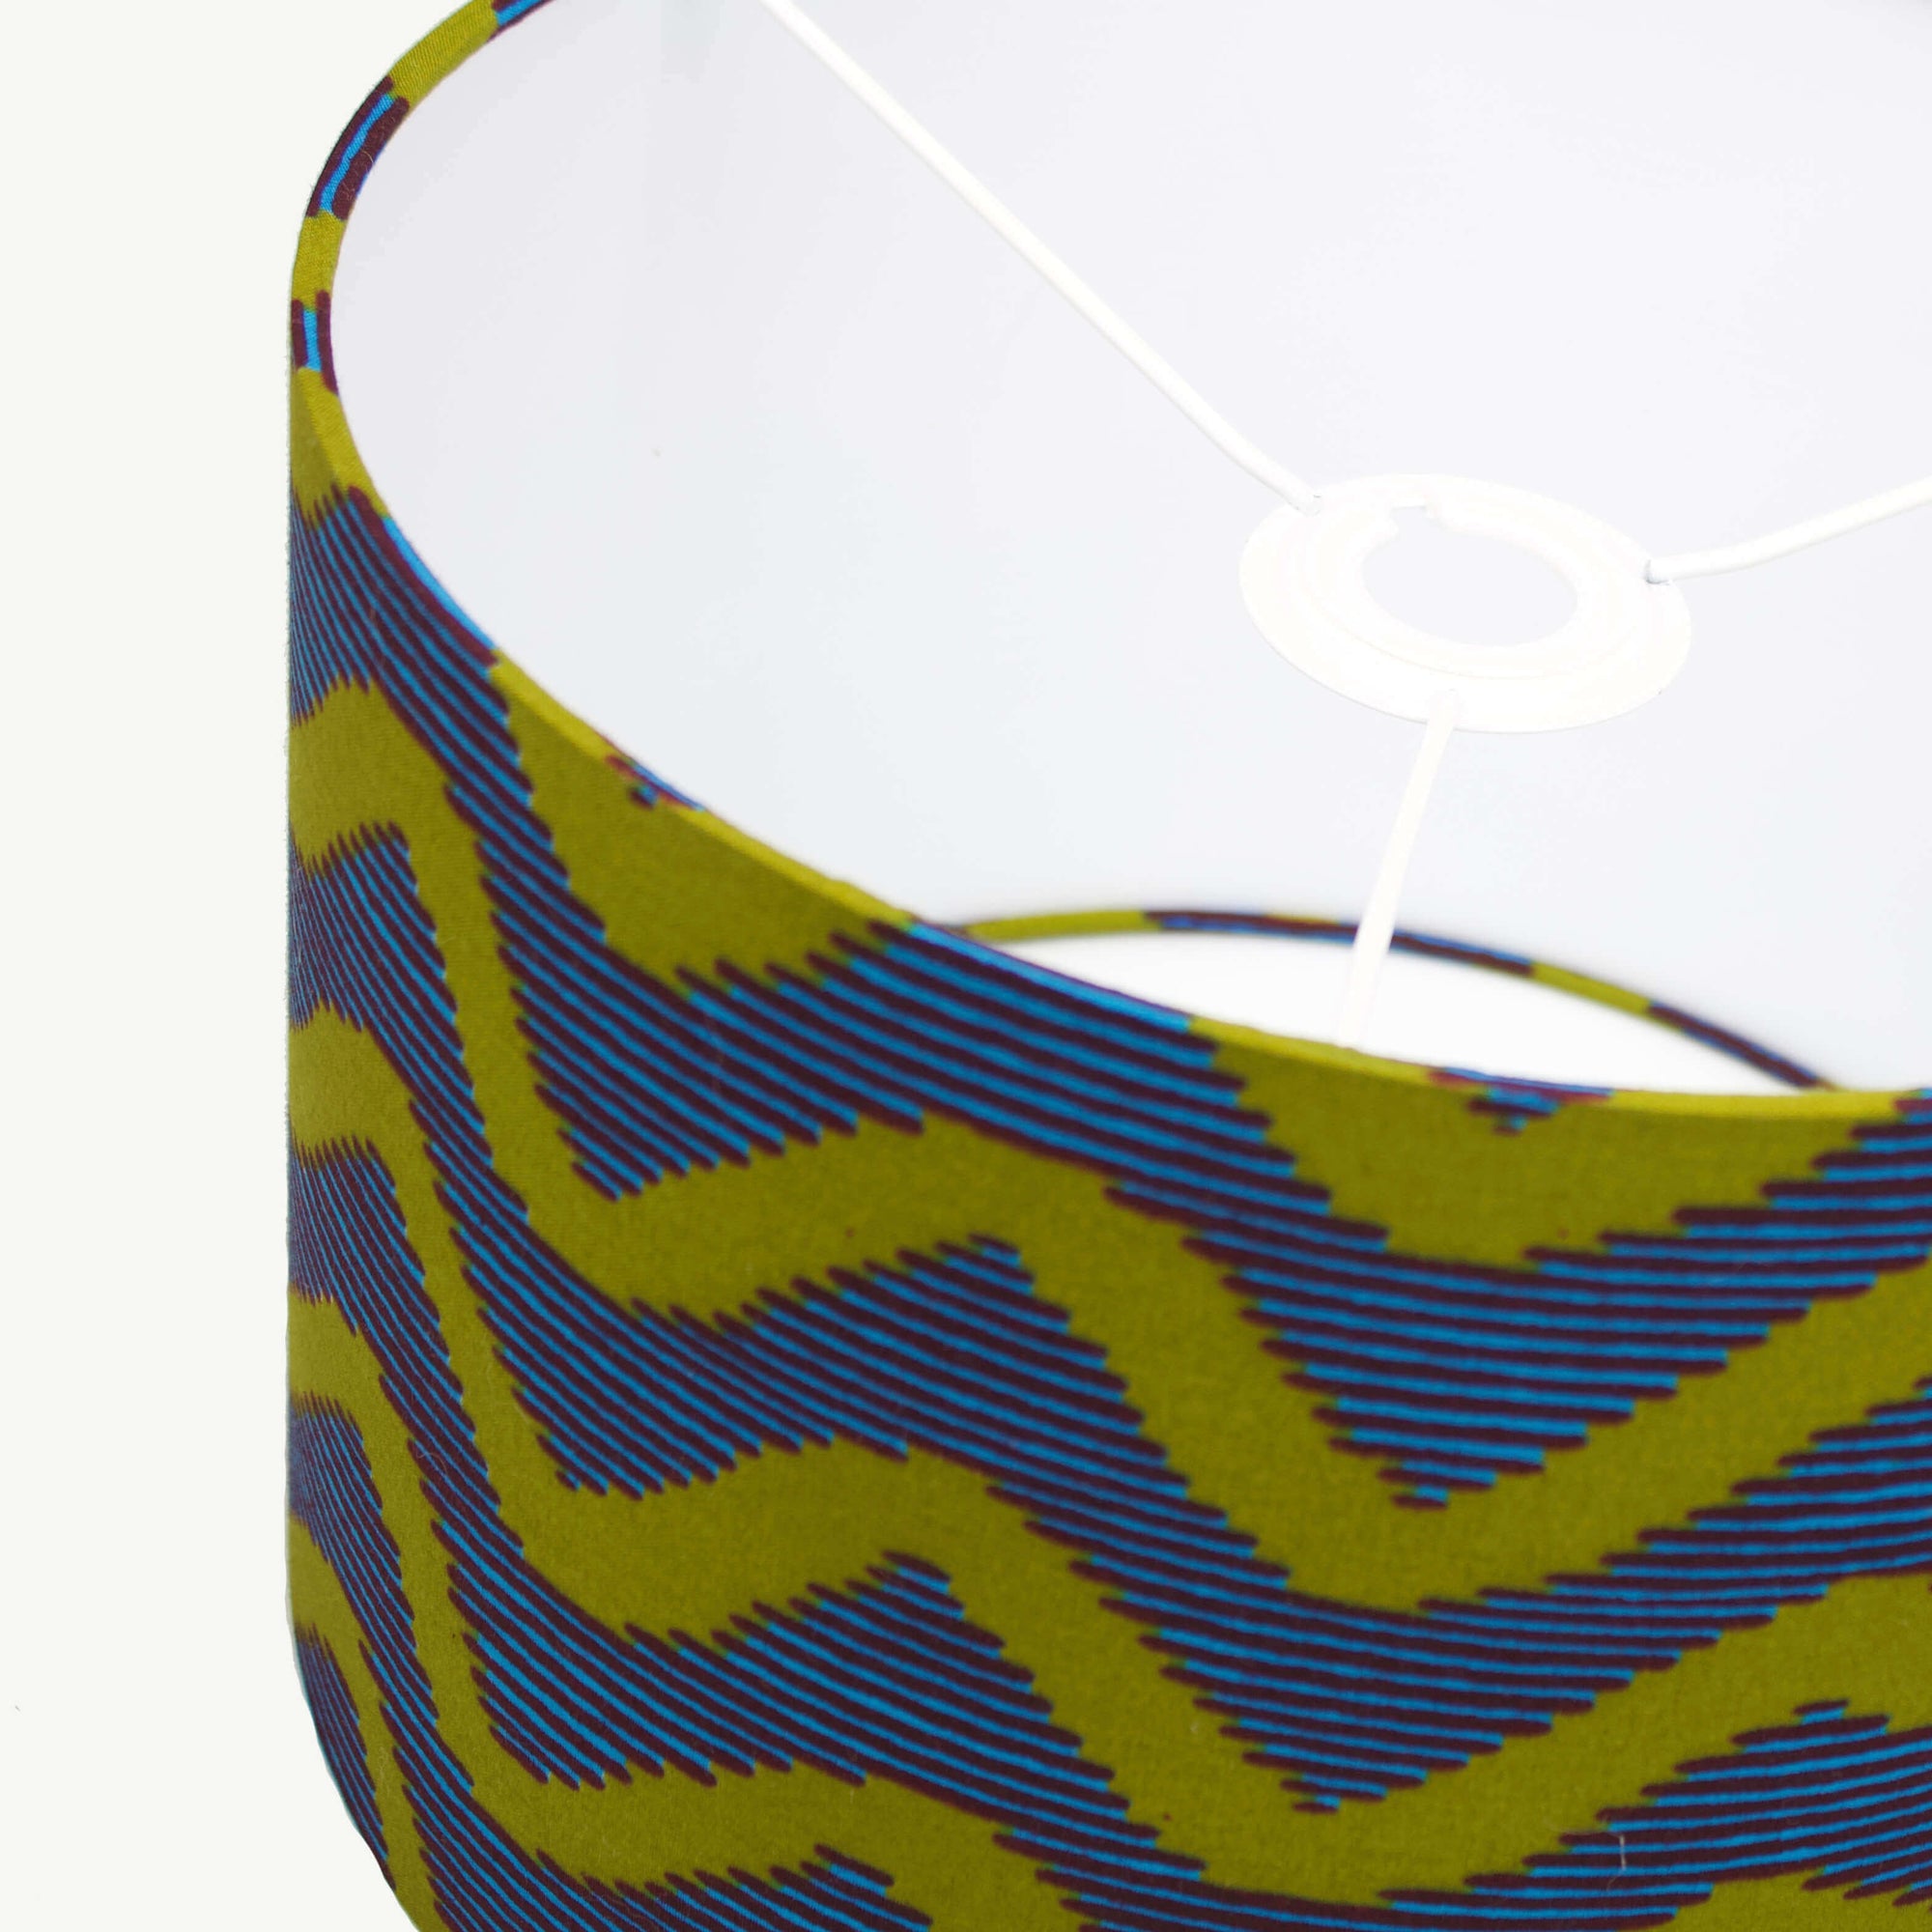 Teal and Yellow Waves African Lampshade - Tropikala